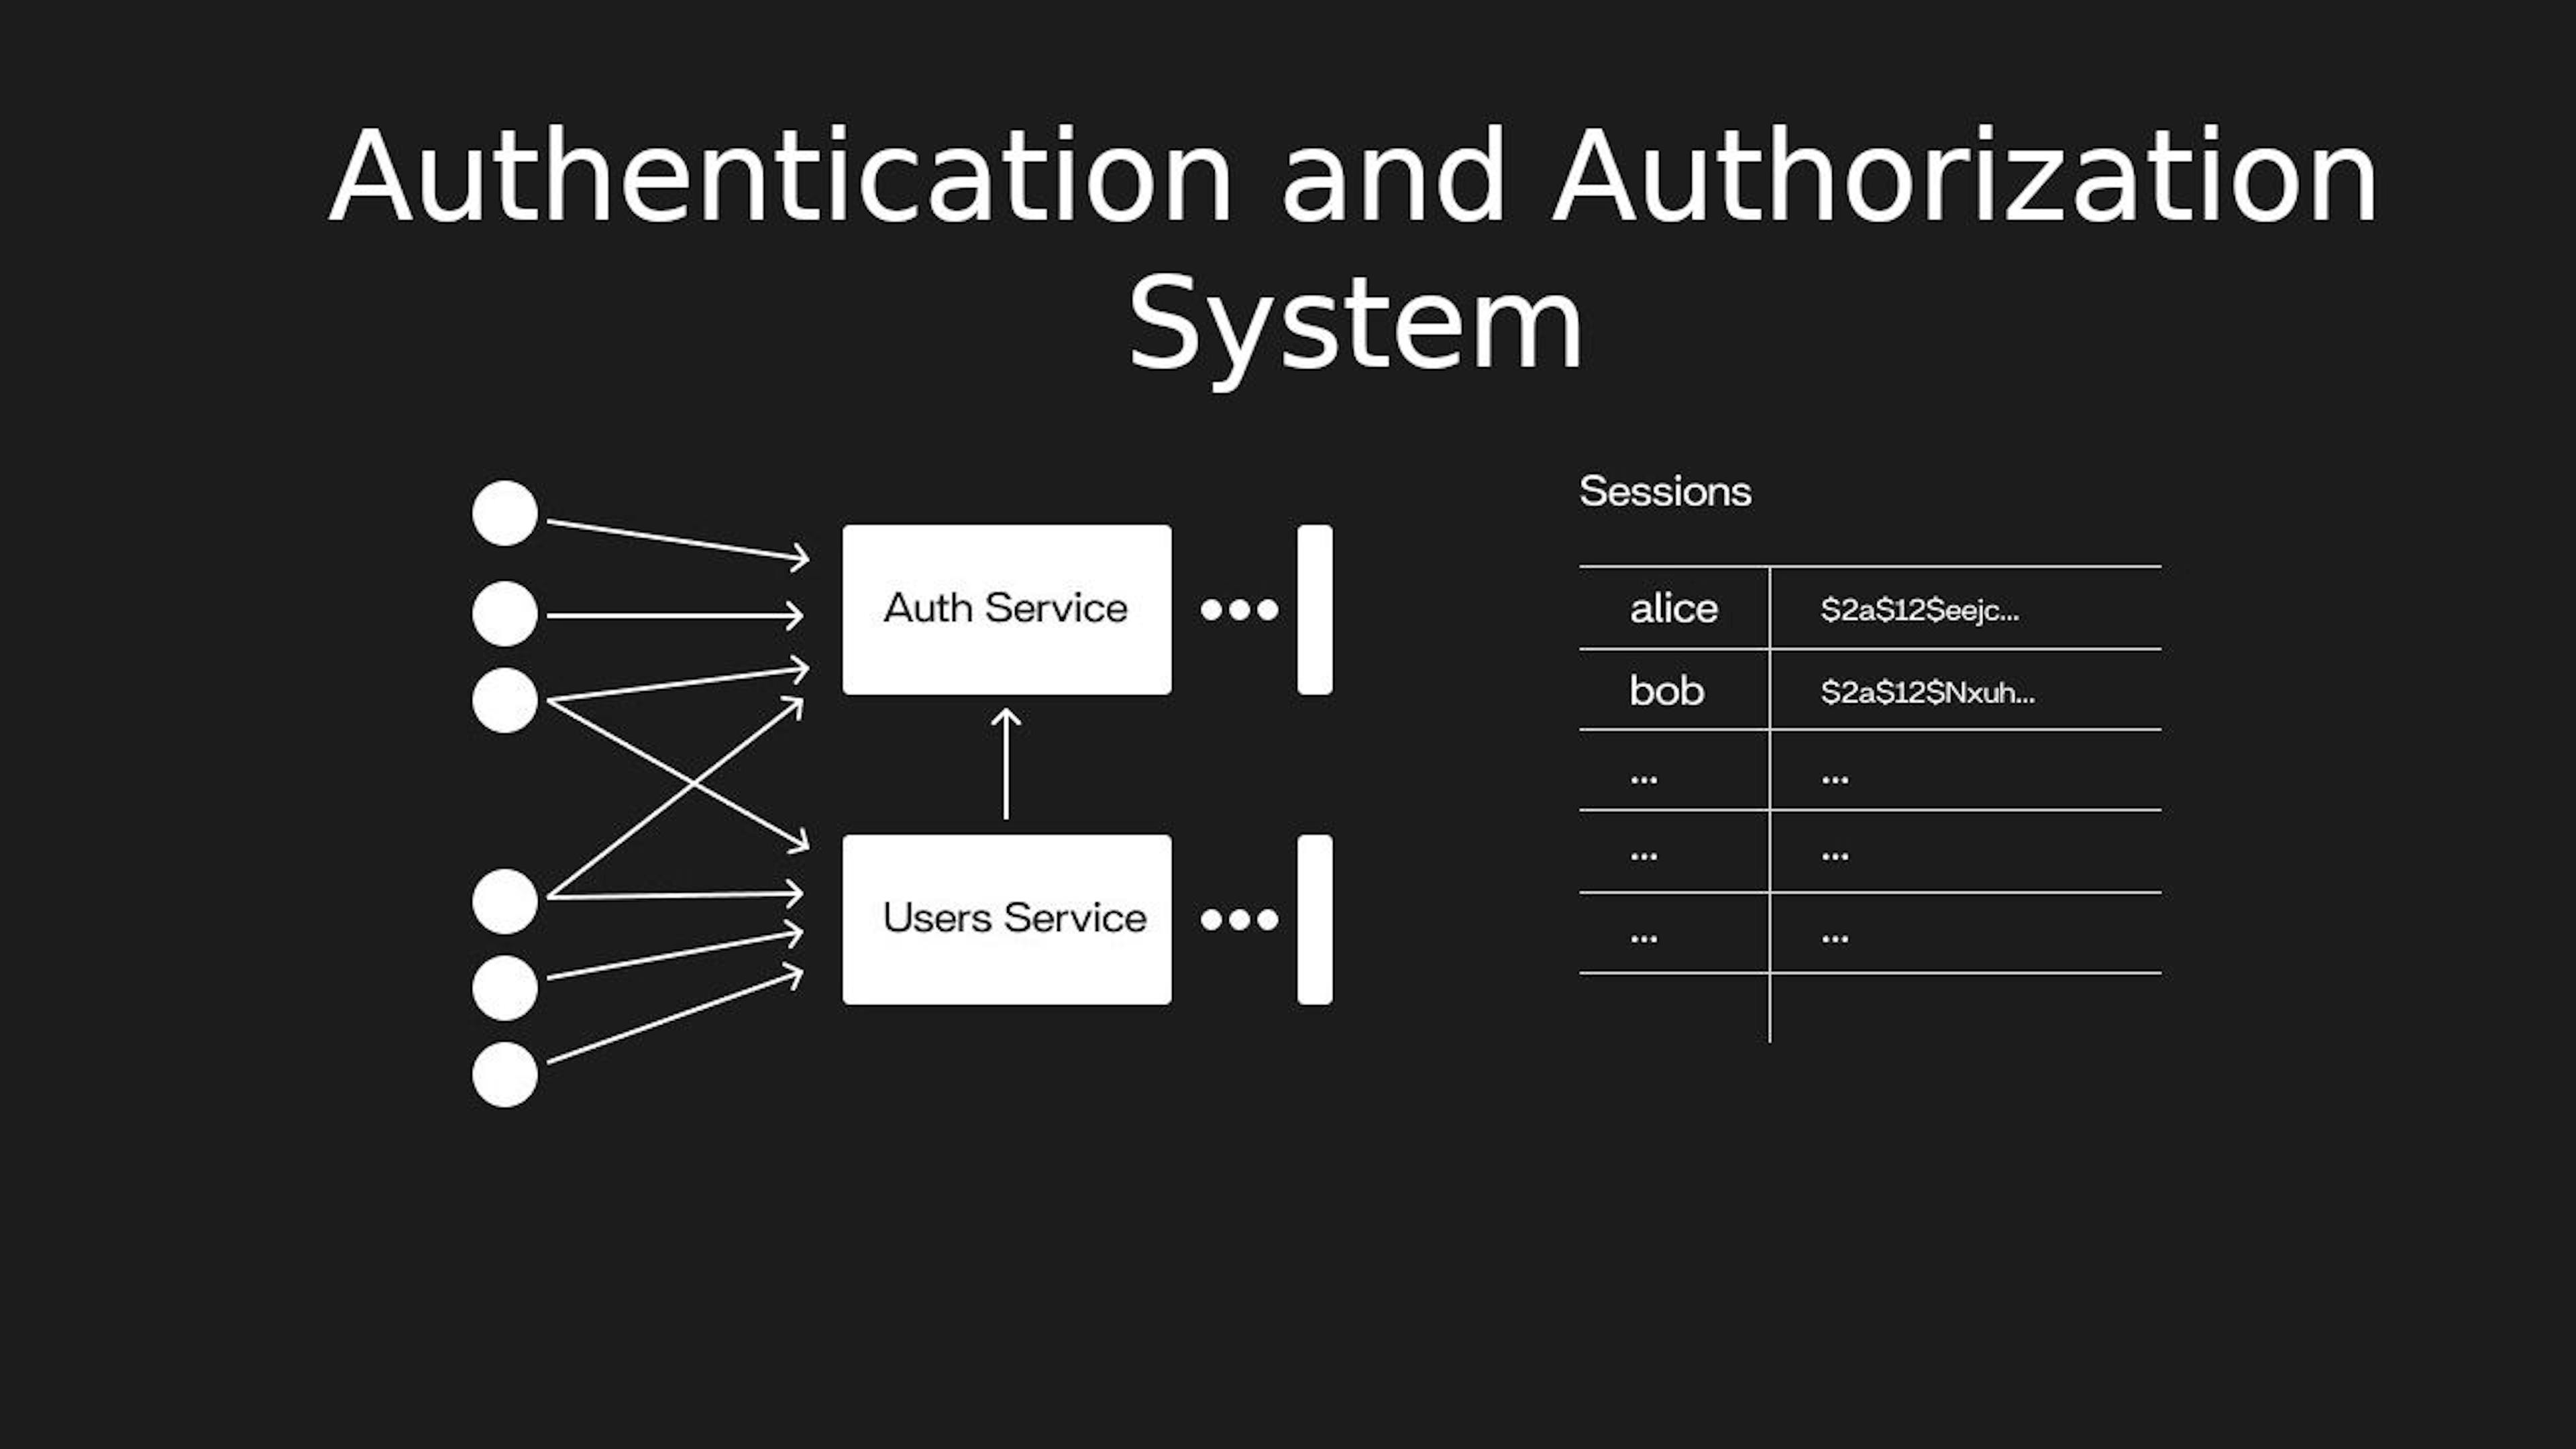 Authentication and Authorization System Design (source: InterviewPen. Modified)